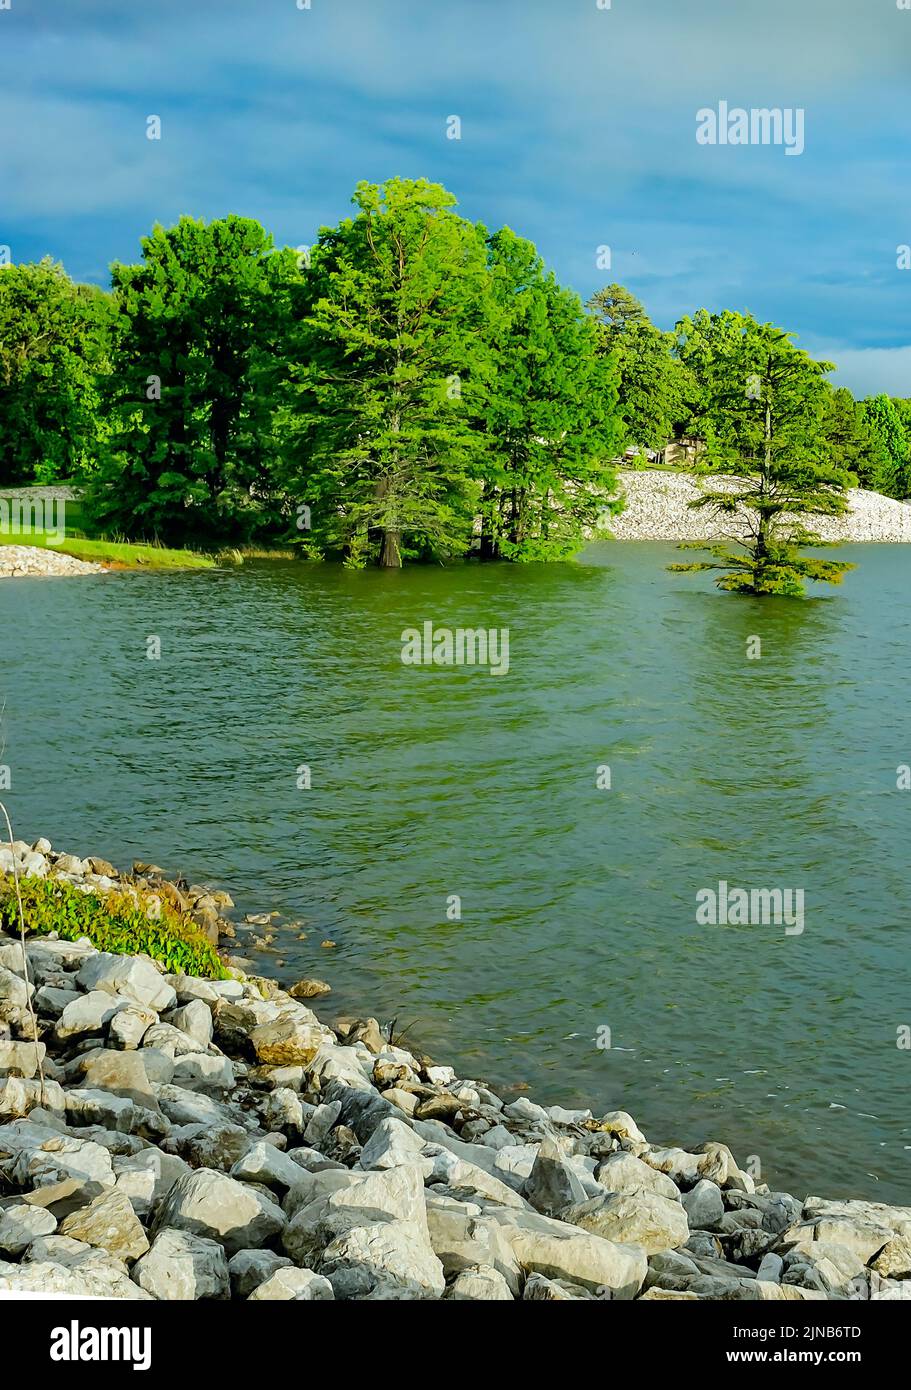 Bald cypress trees (Taxodium distichum) grow along the edge of Sardis Lake, May 31, 2015 in Batesville, Mississippi. Stock Photo